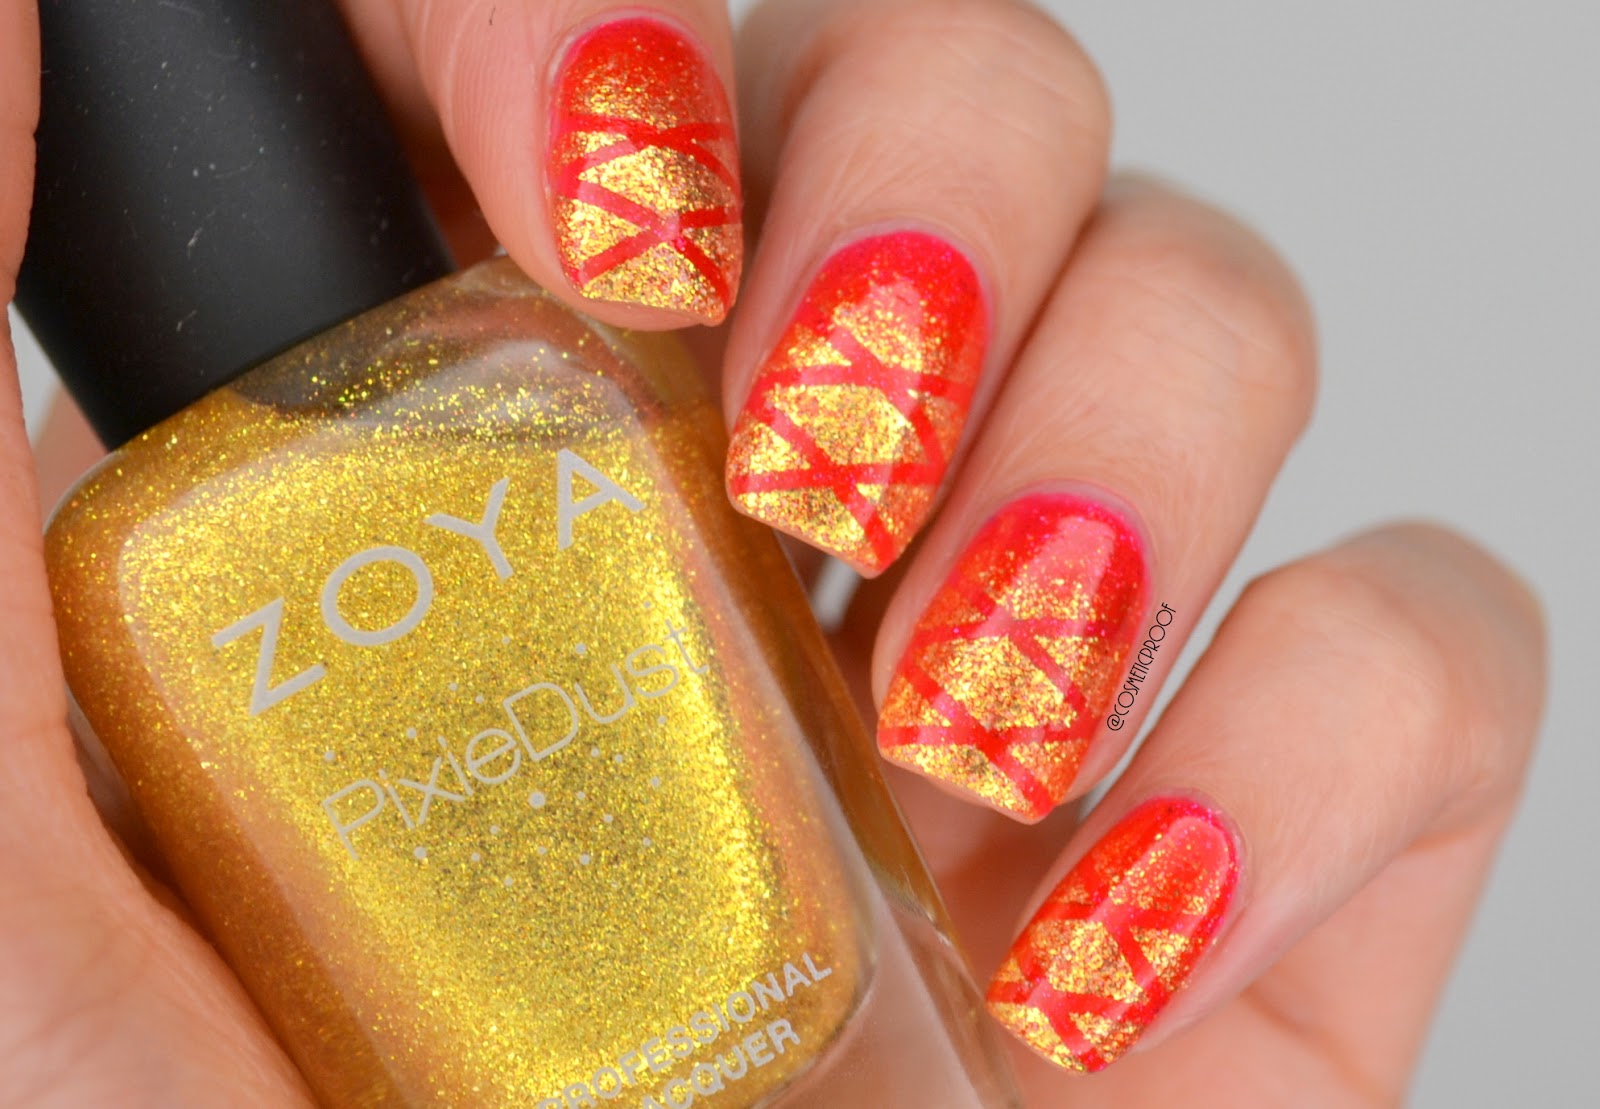 9. Red and Yellow Gradient Nail Art - wide 5